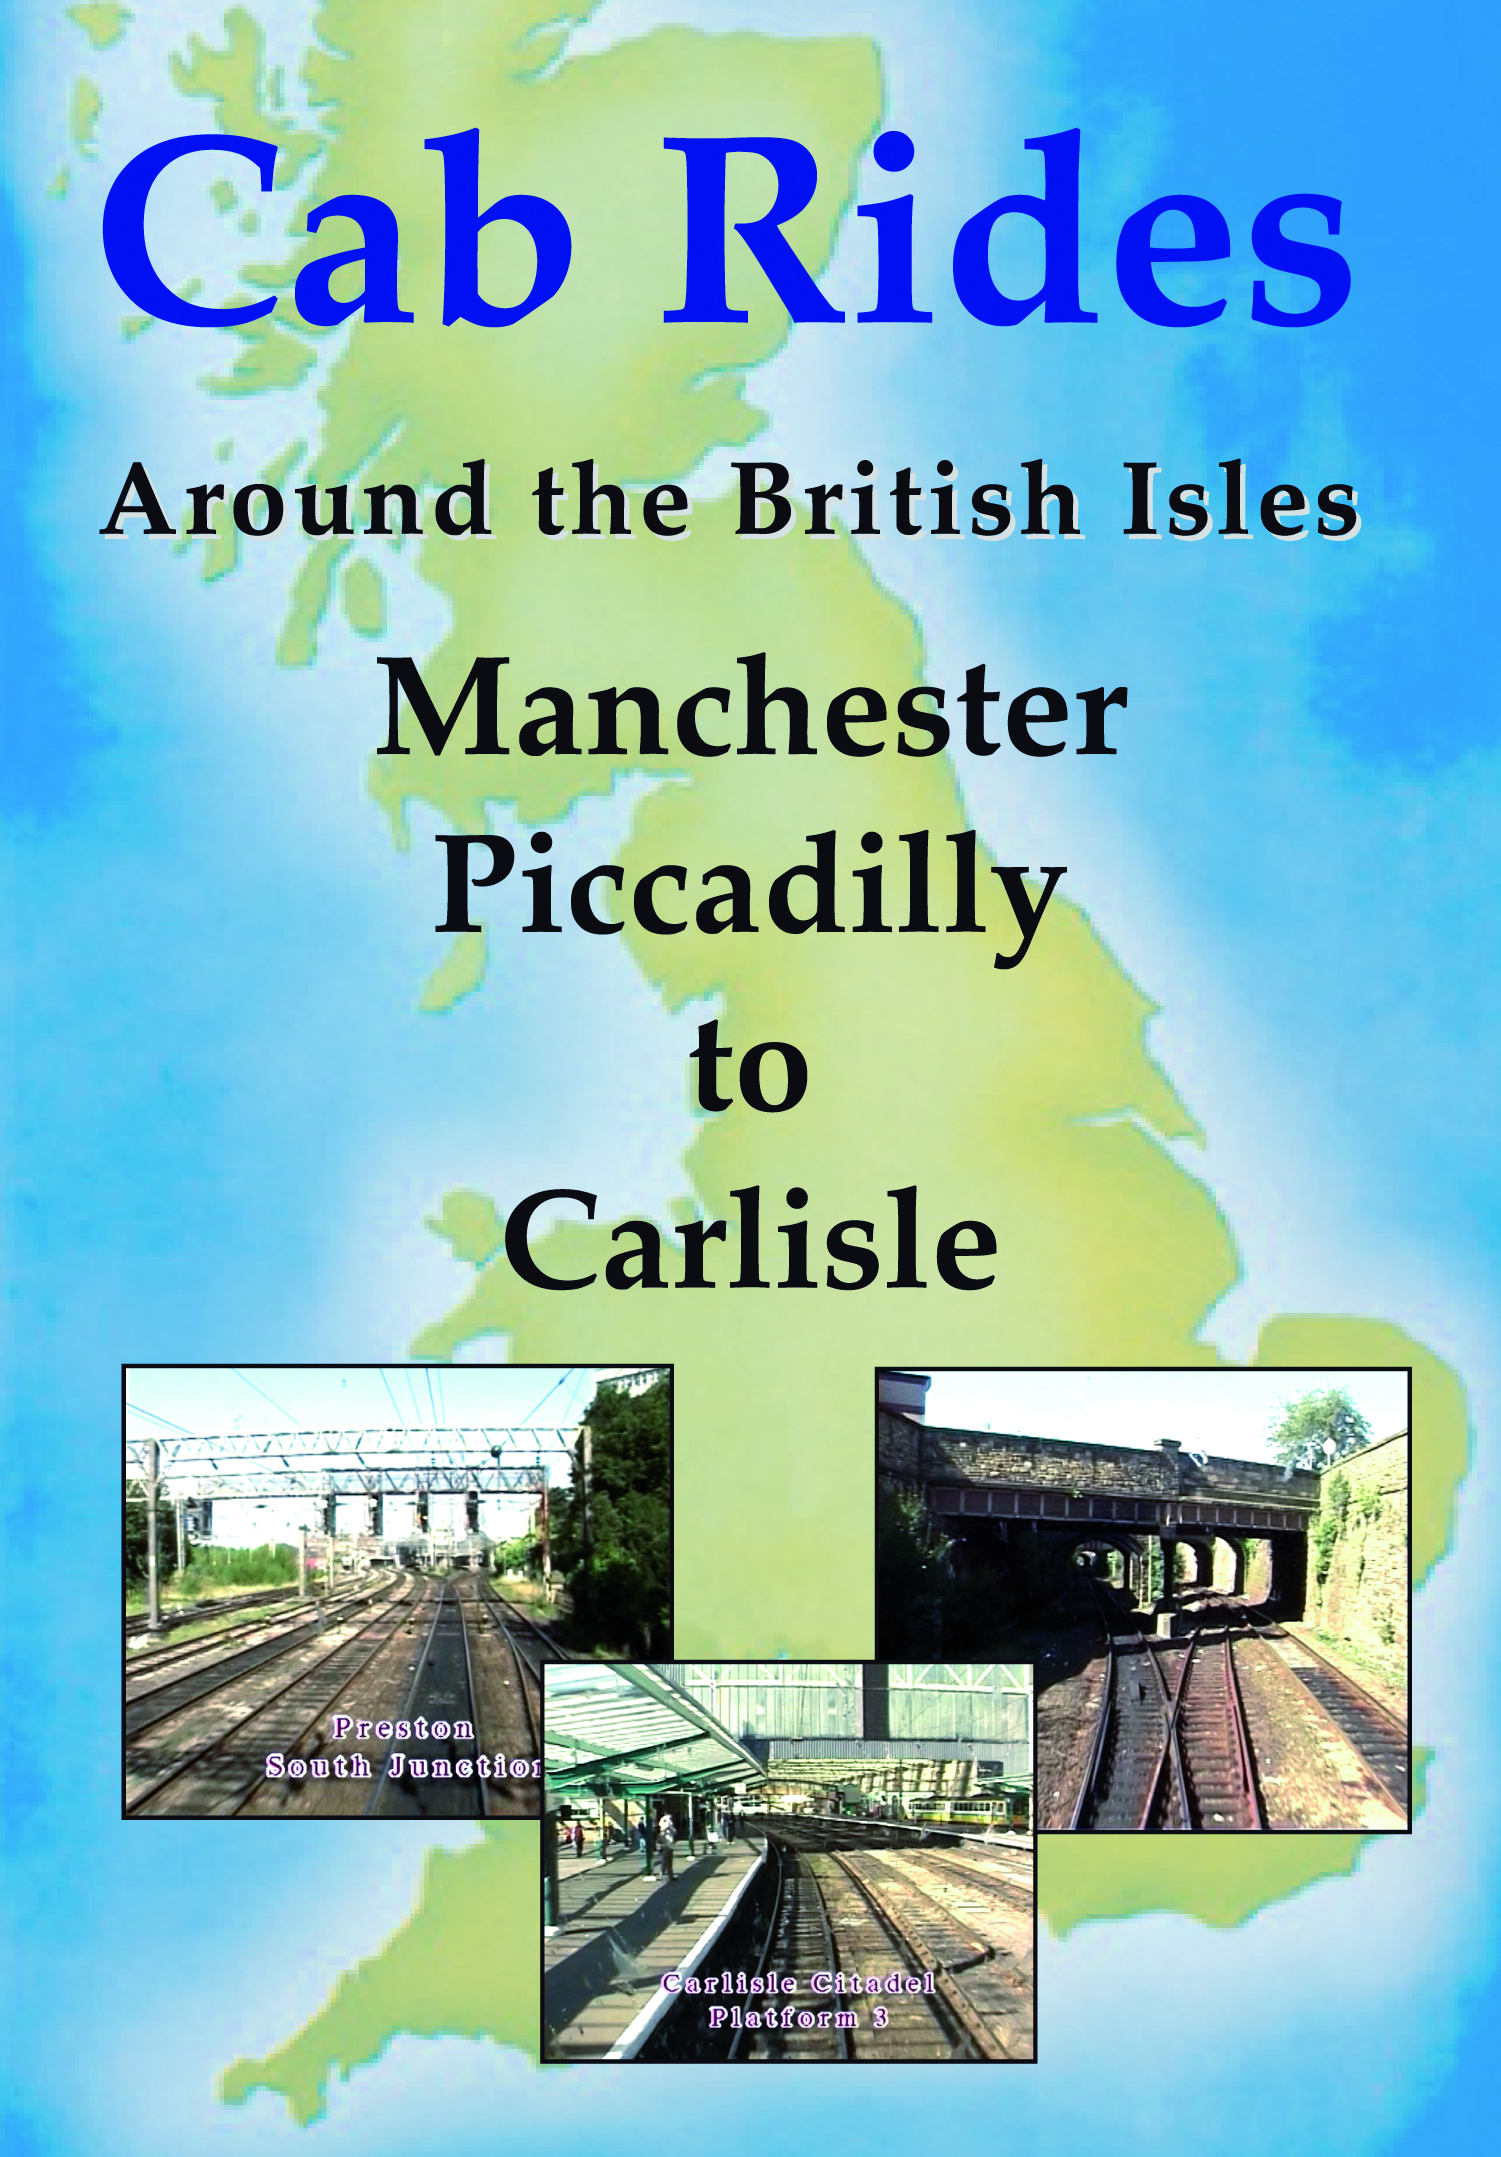 Cab Rides Around the British Isles: Manchester Piccadilly to Carlisle in 2002.